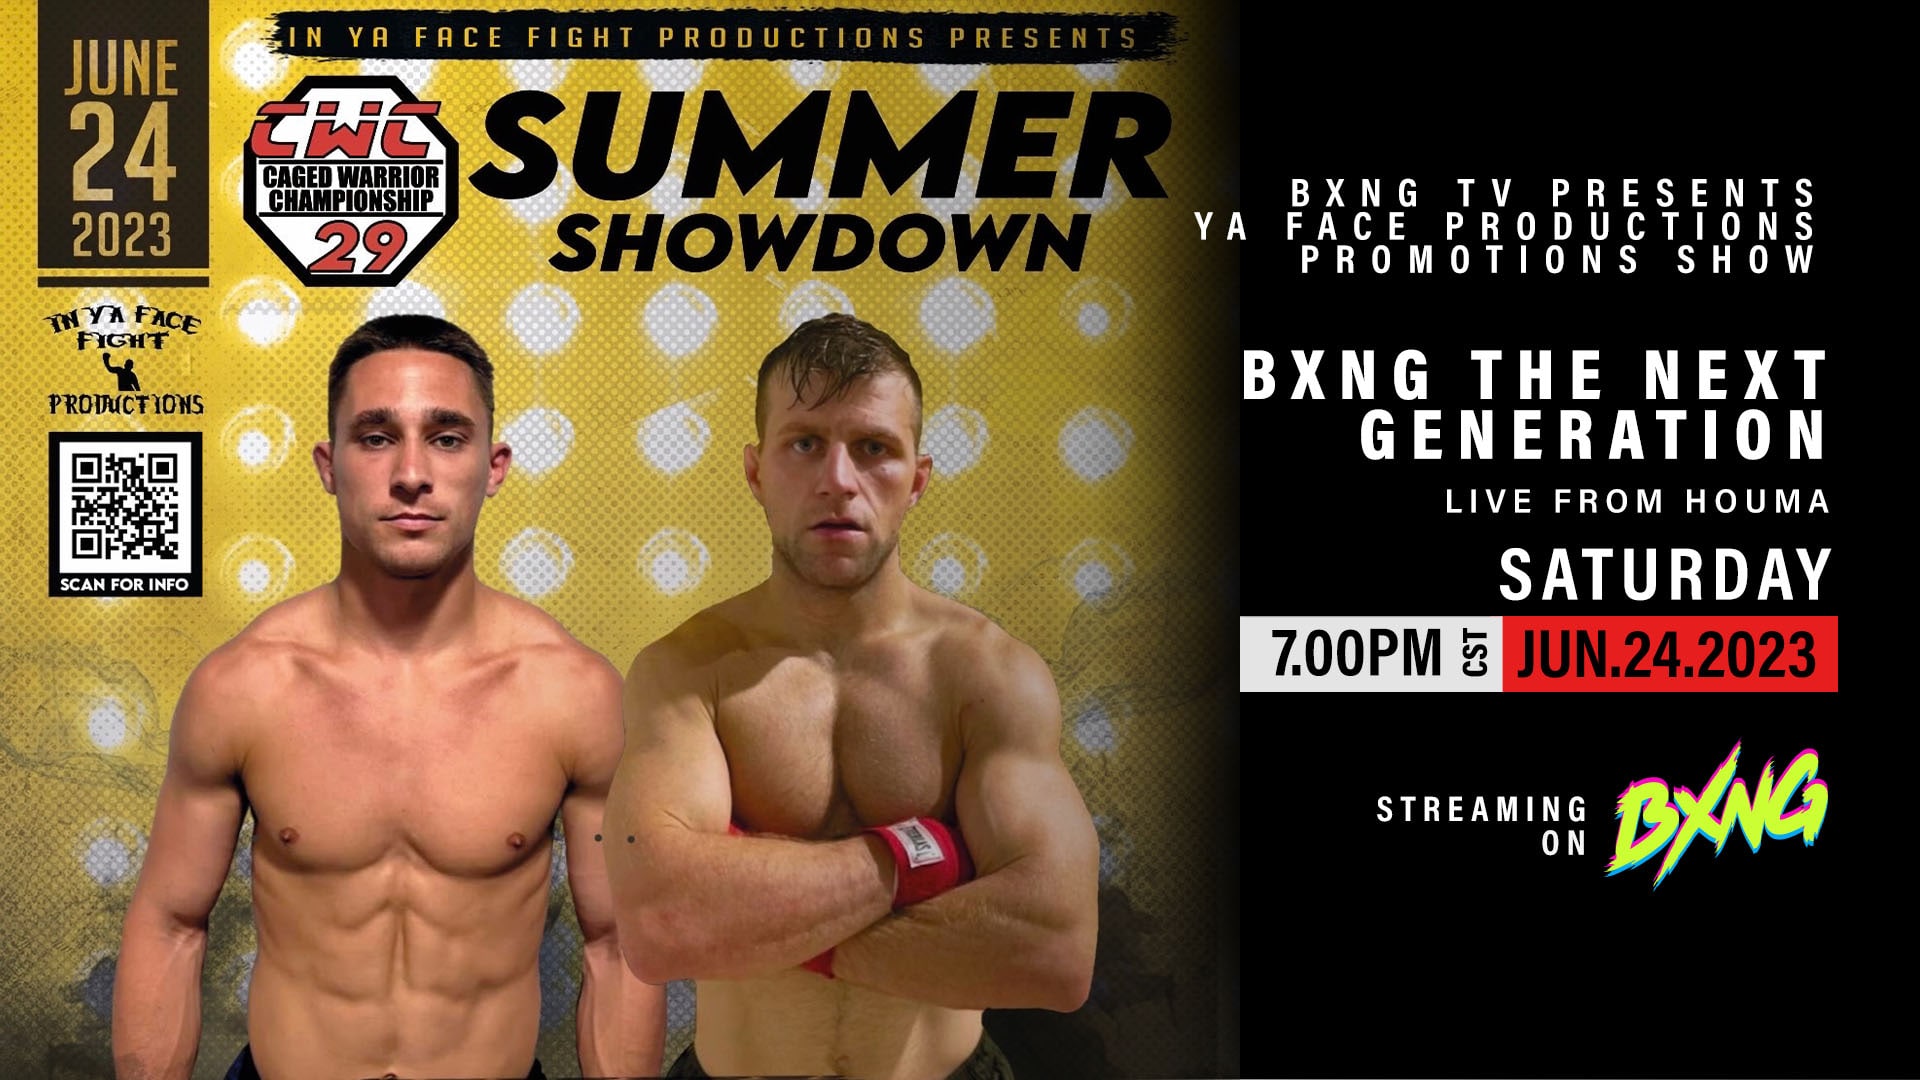 BXNG TV Presents Caged Warrior Championship 29 Show Live Stream 06/24/23